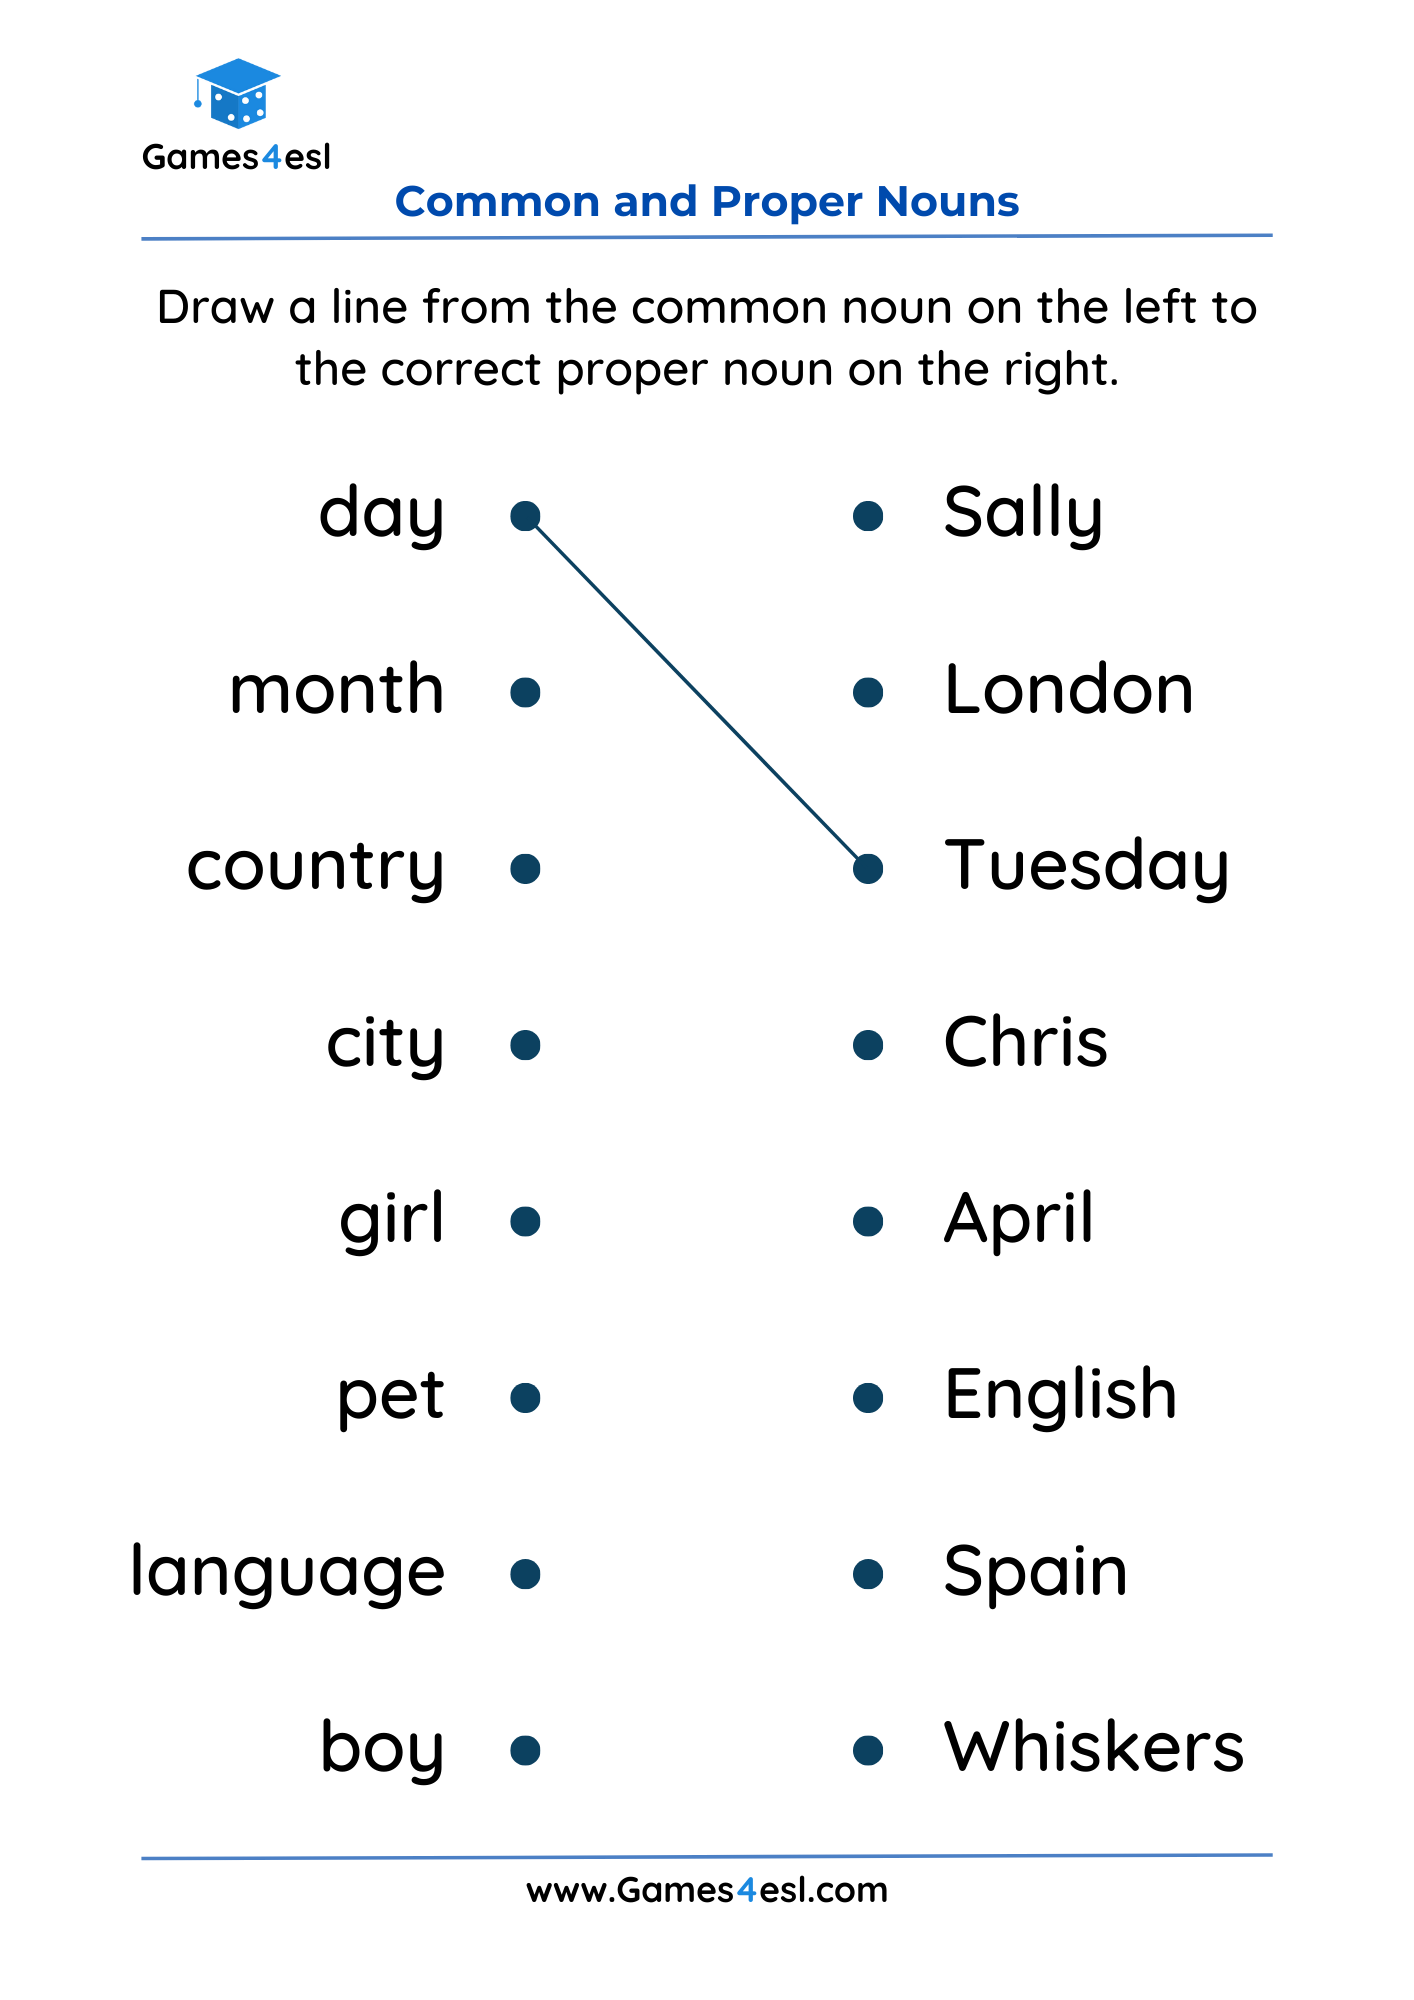 A Grade 2 Worksheet for teaching common and proper nouns.